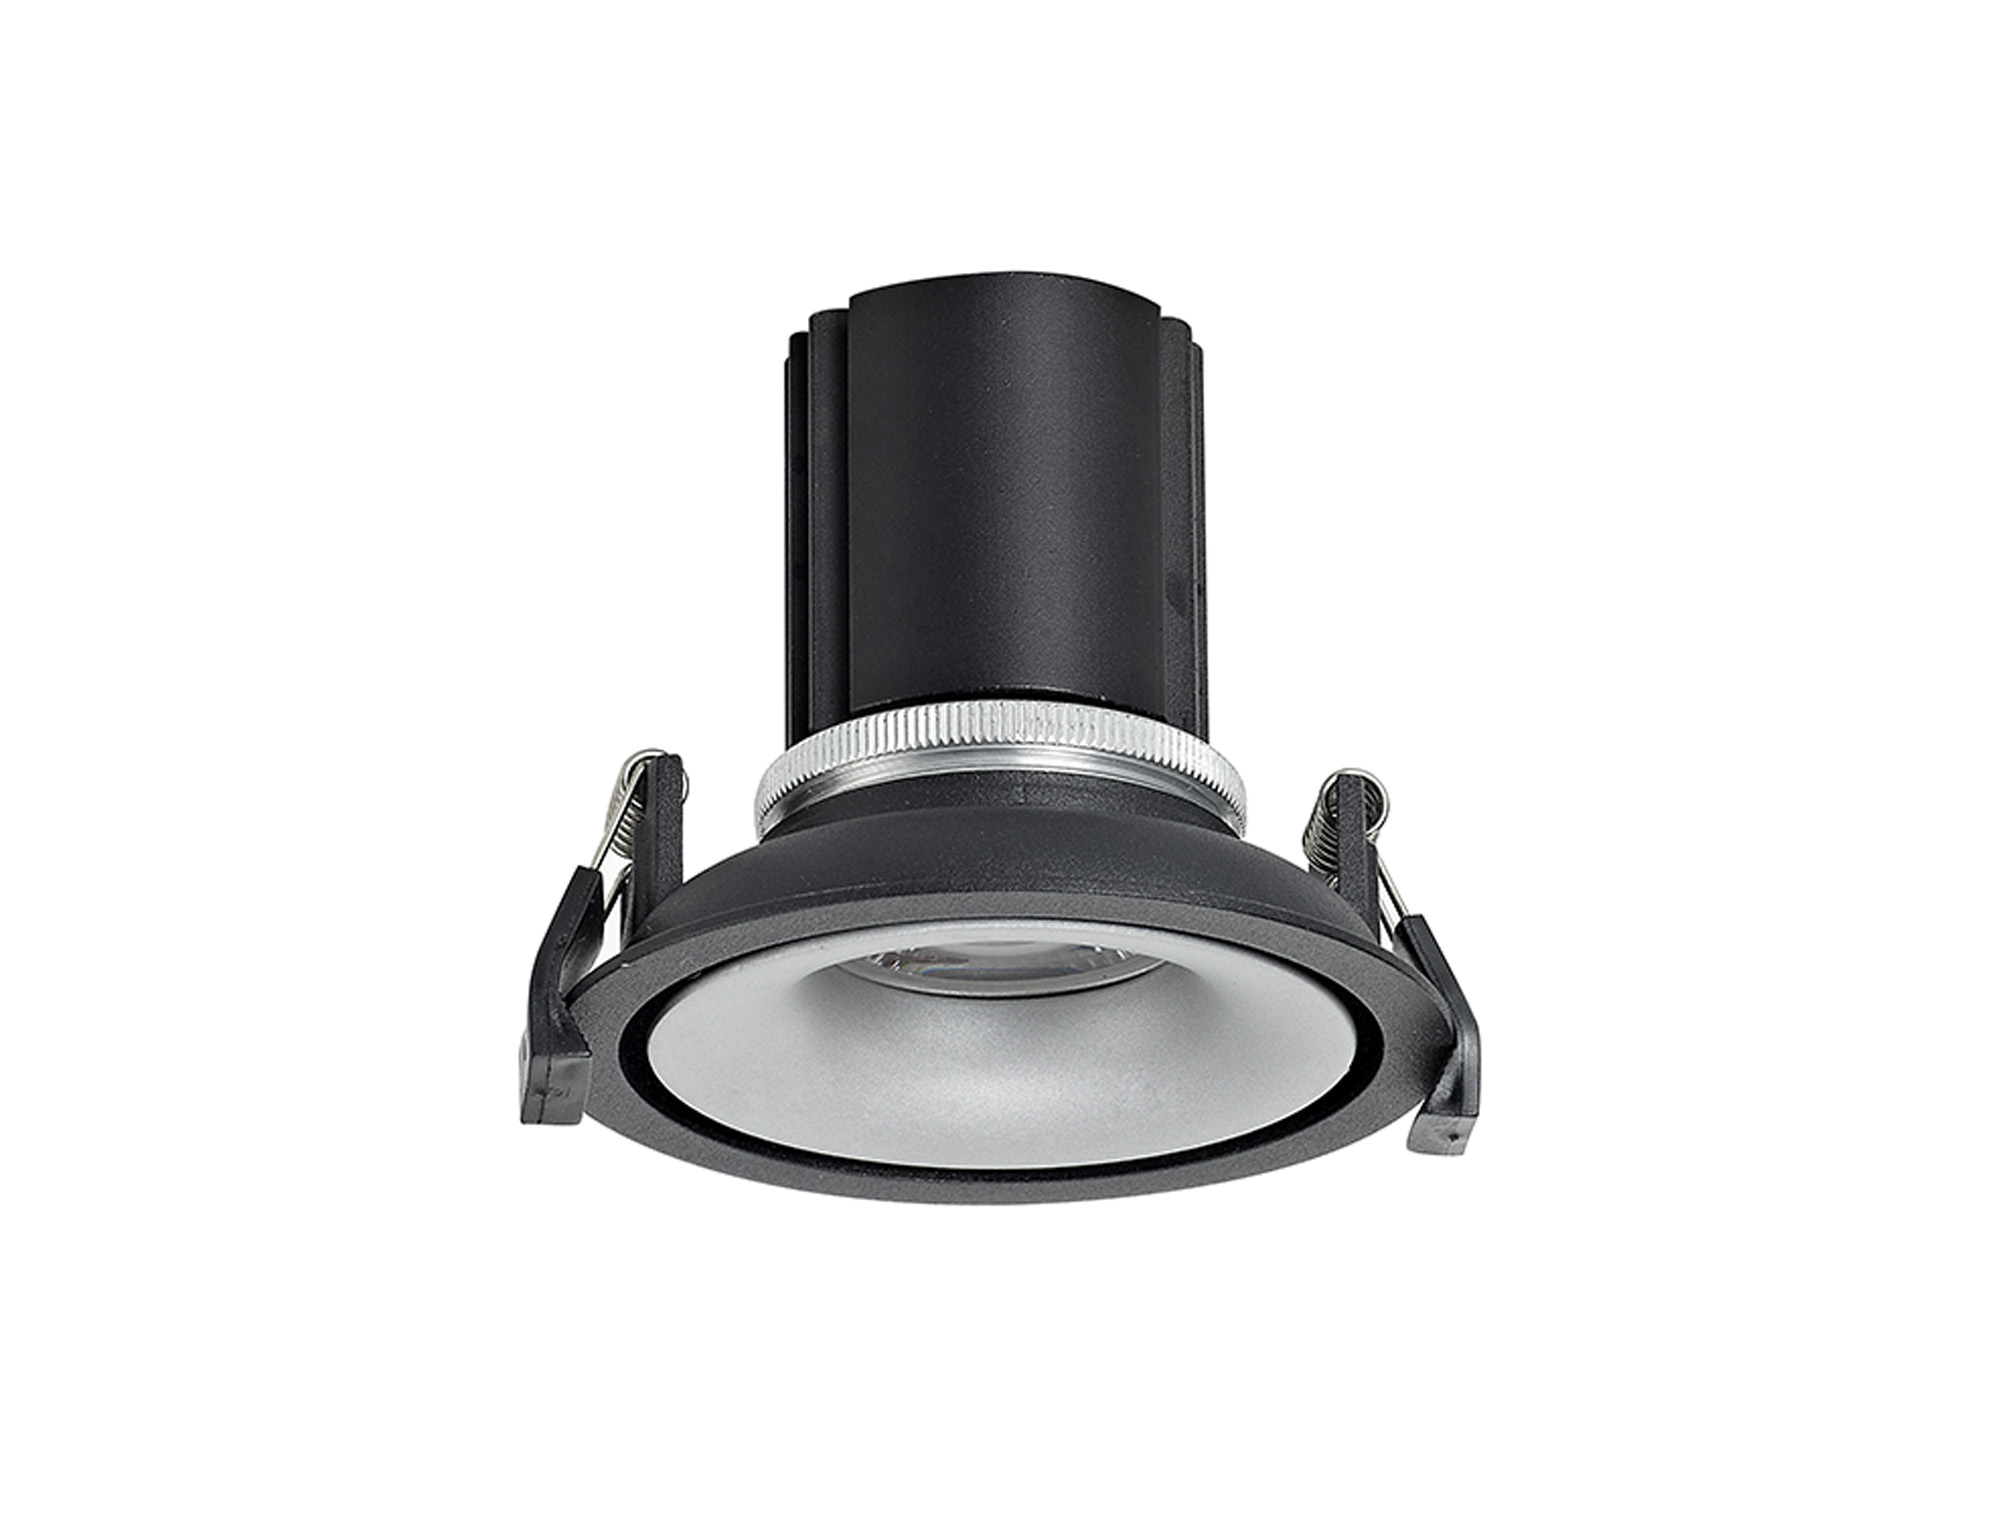 DM202153  Bolor 12 Tridonic Powered 12W 2700K 1200lm 12° CRI>90 LED Engine Black/Silver Fixed Recessed Spotlight; IP20